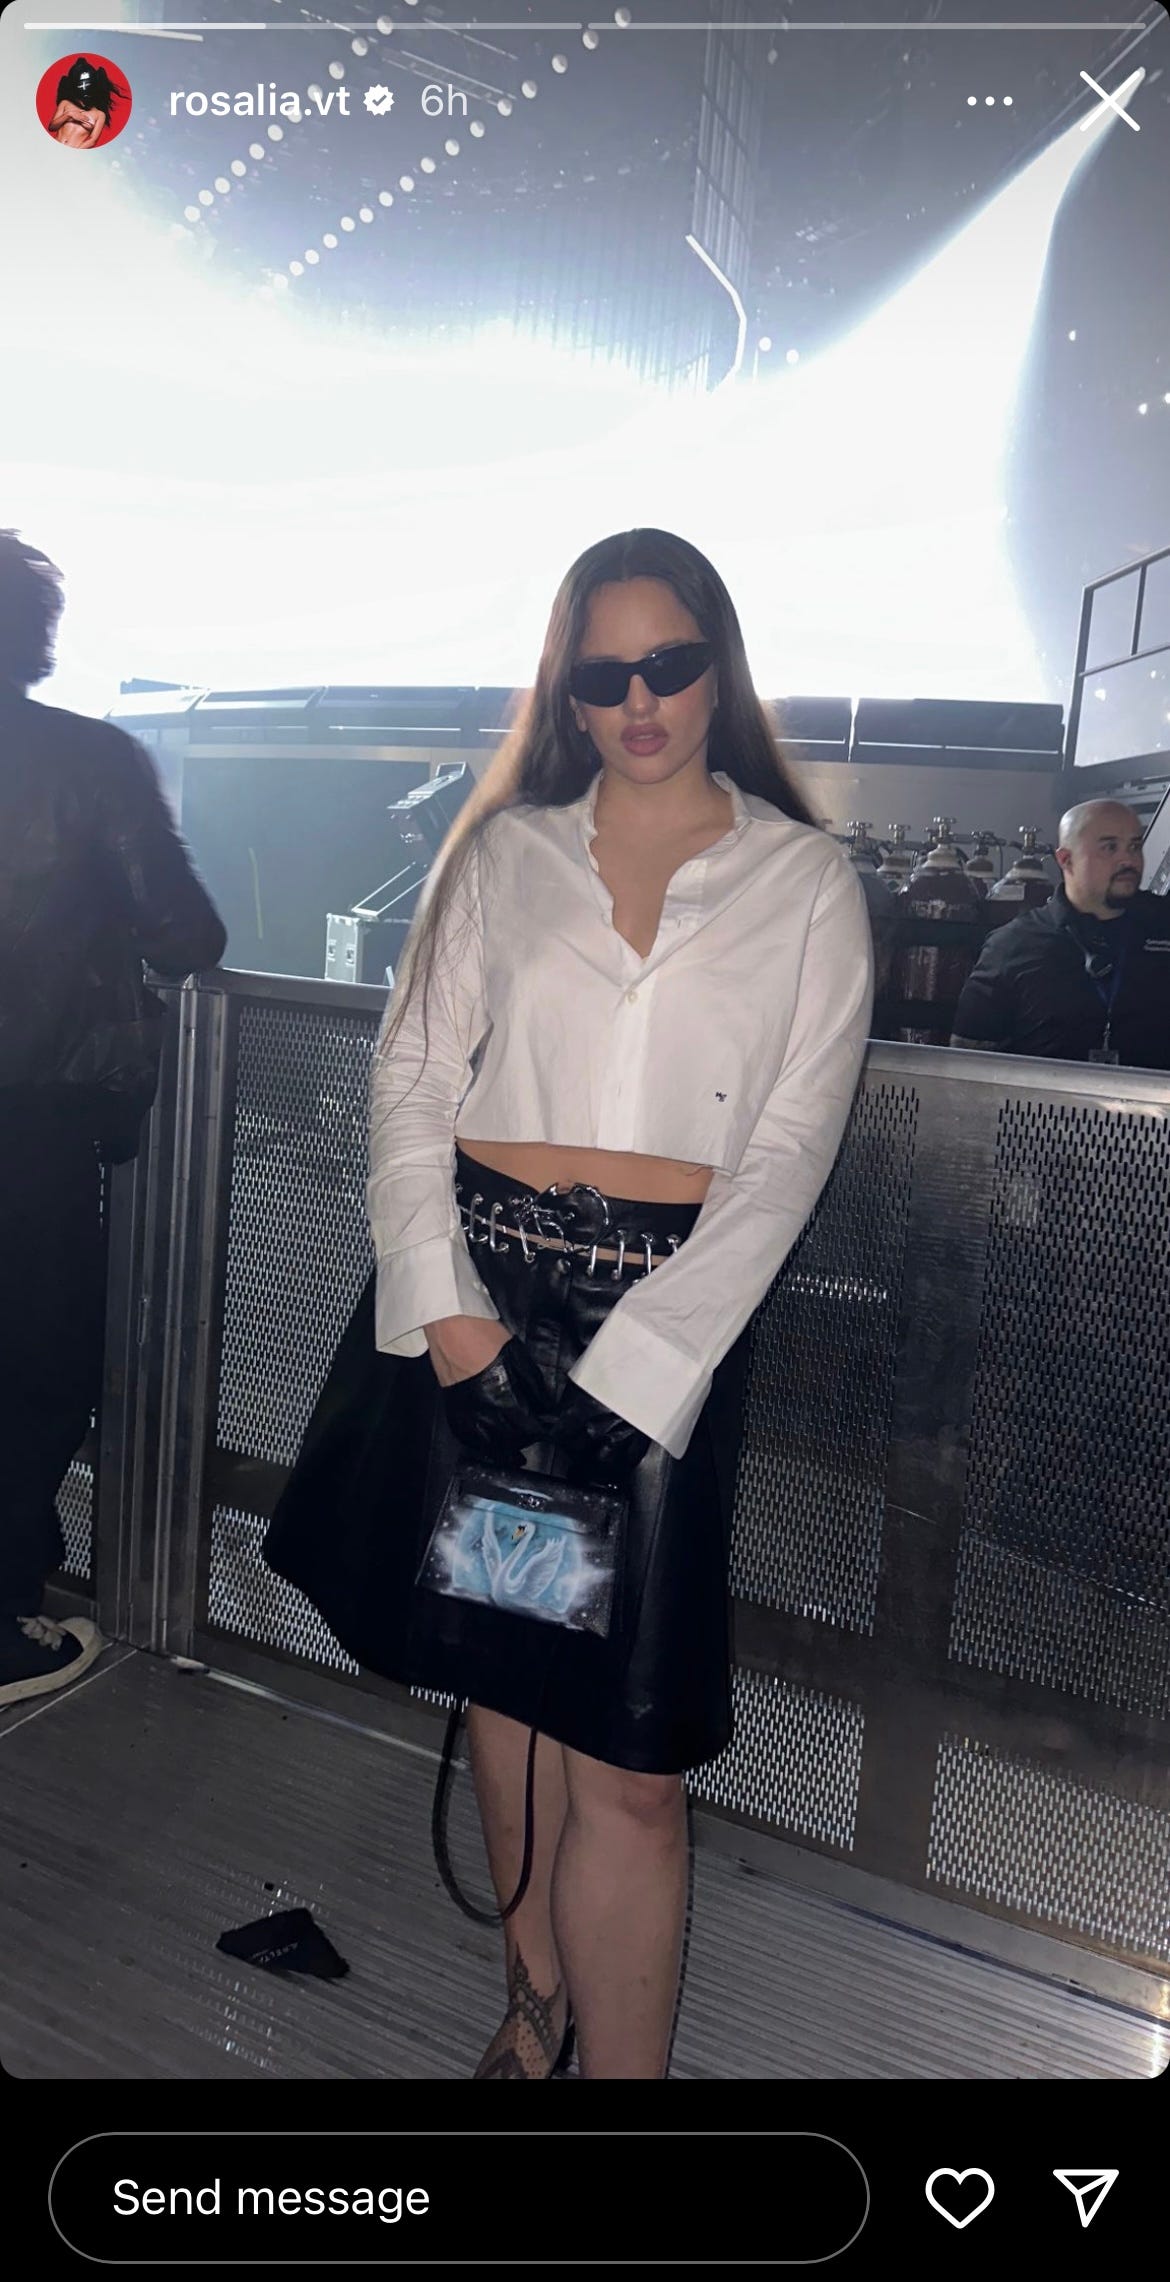 Rosalía Puts an Edgy, Goth Twist on Businesswear Staples While Attending Bad Bunny's L.A. Concert